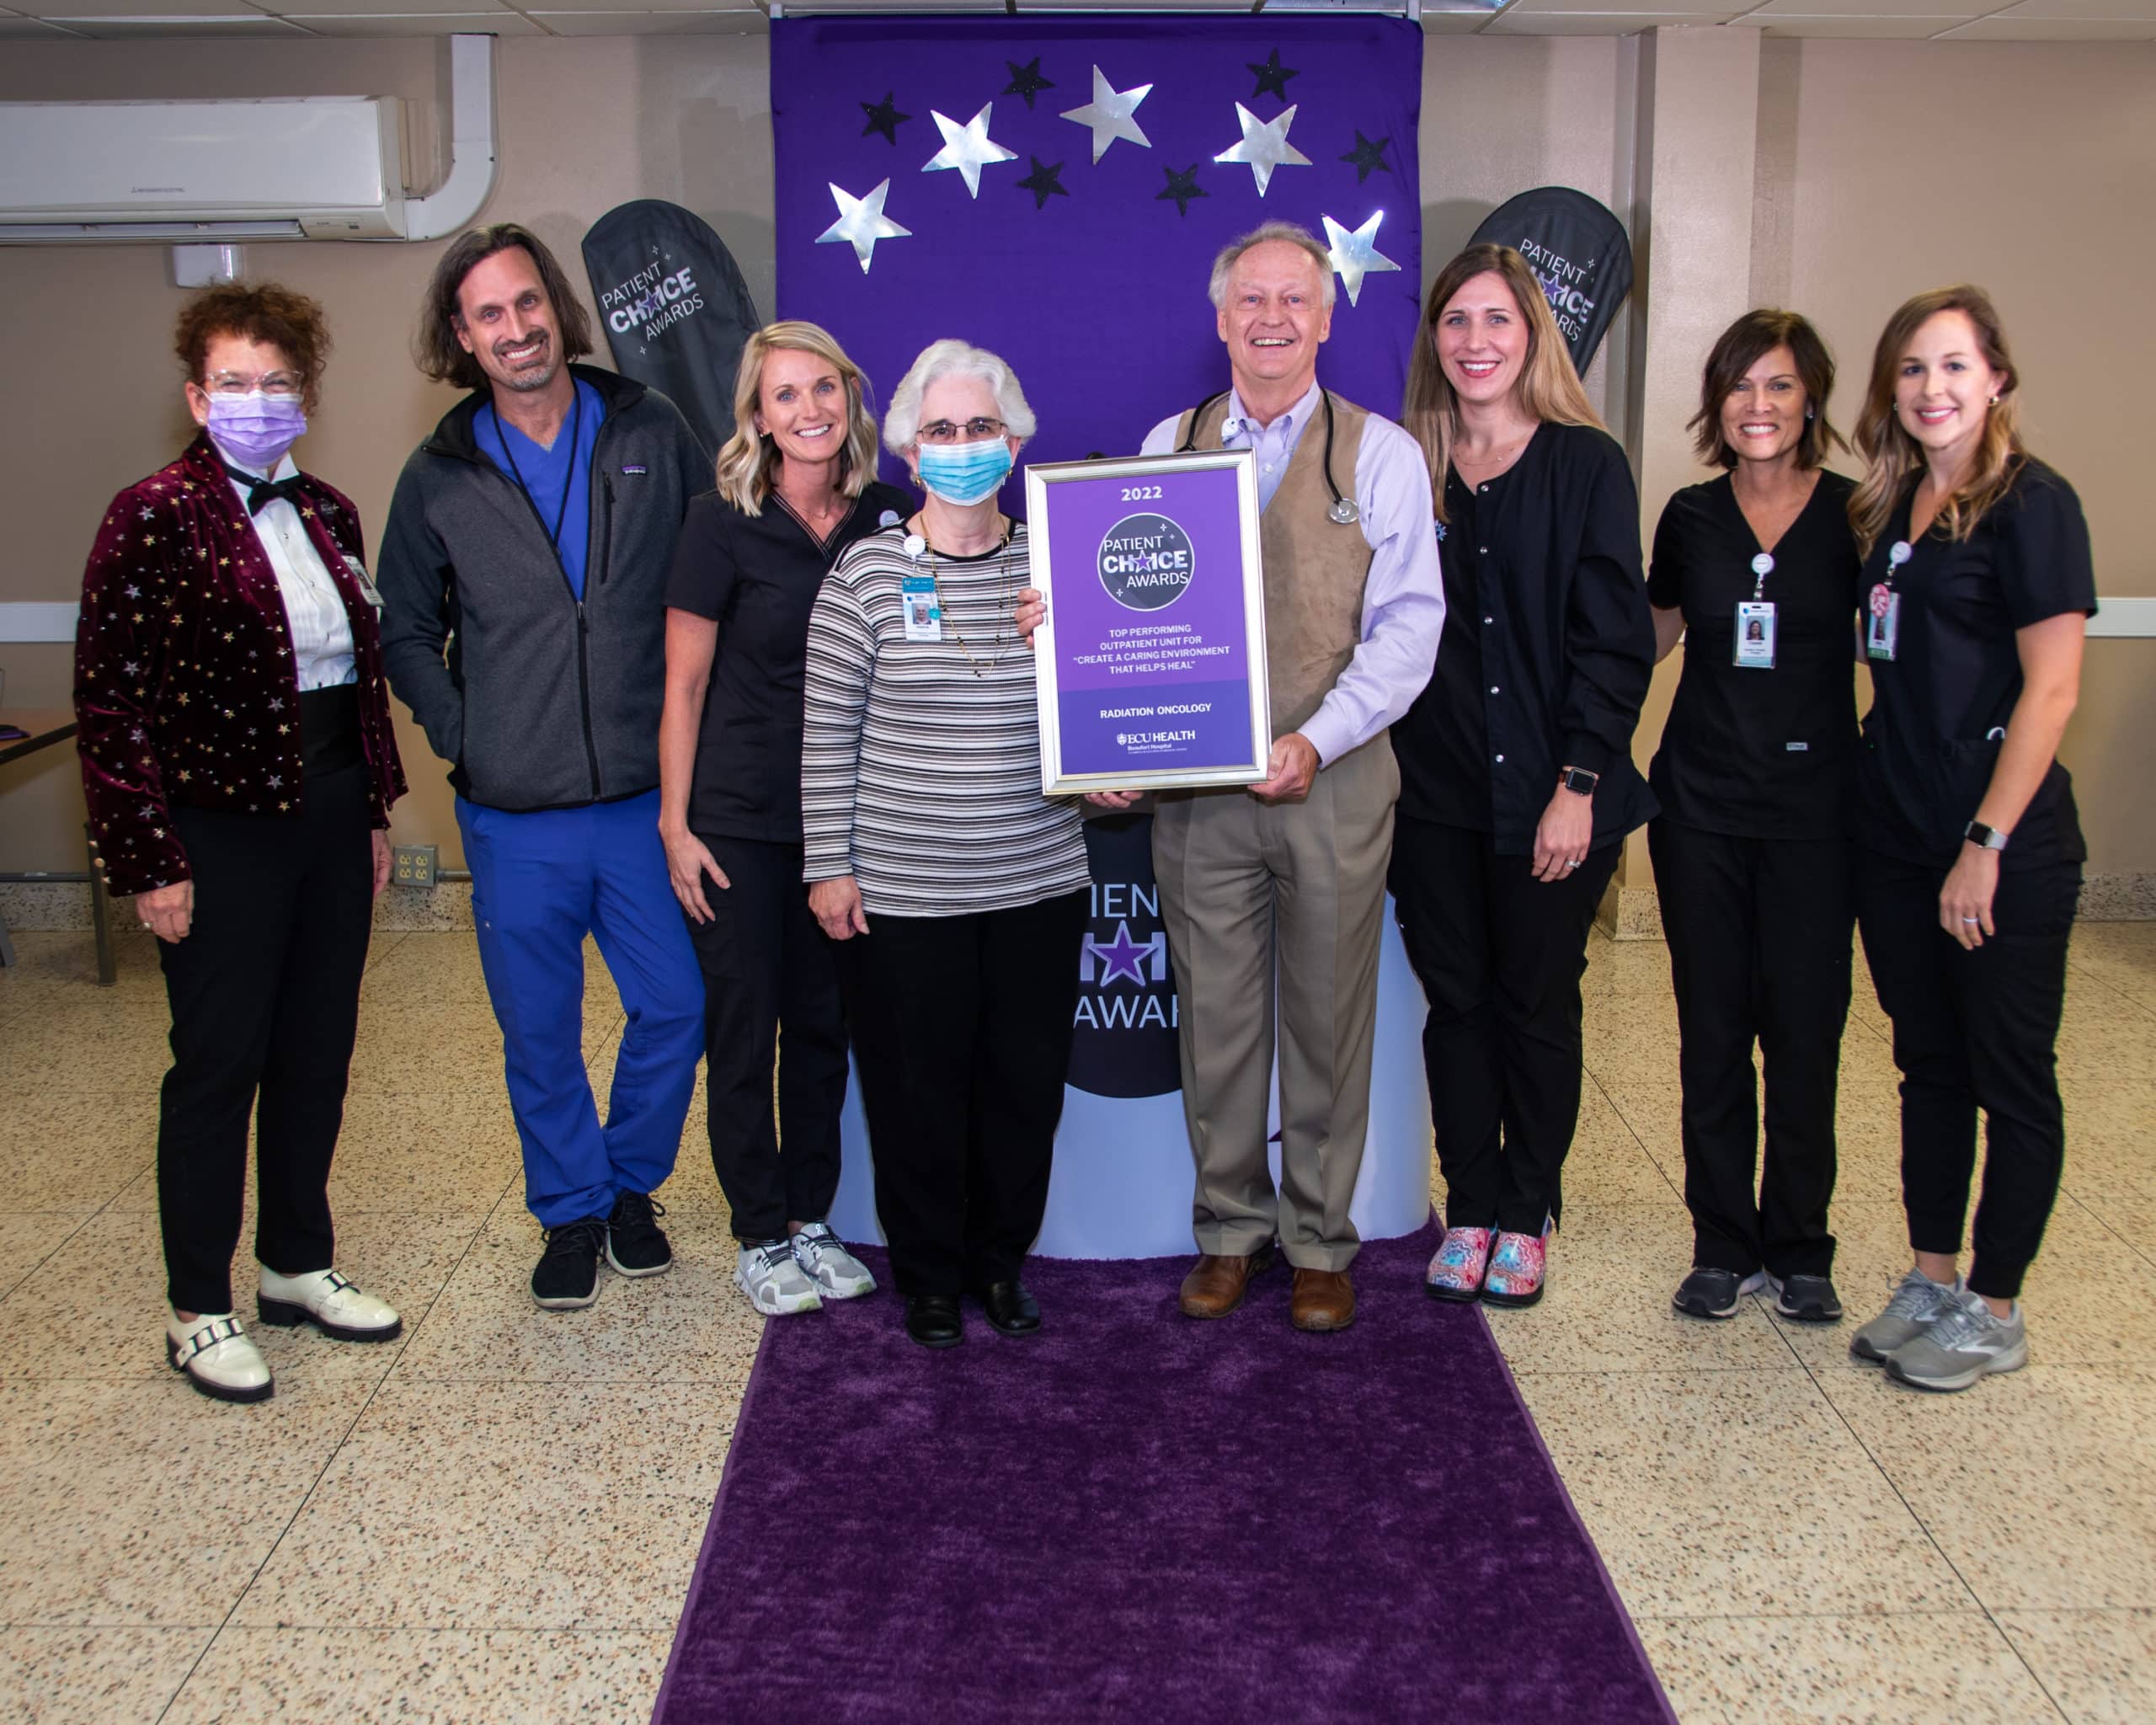 The ECU Health Beaufort Hospital – Radiation Oncology team poses for a photo after earning the Patient Choice Award for Top Performing Outpatient Unit for Creating a Caring Environment that Helps Heal.